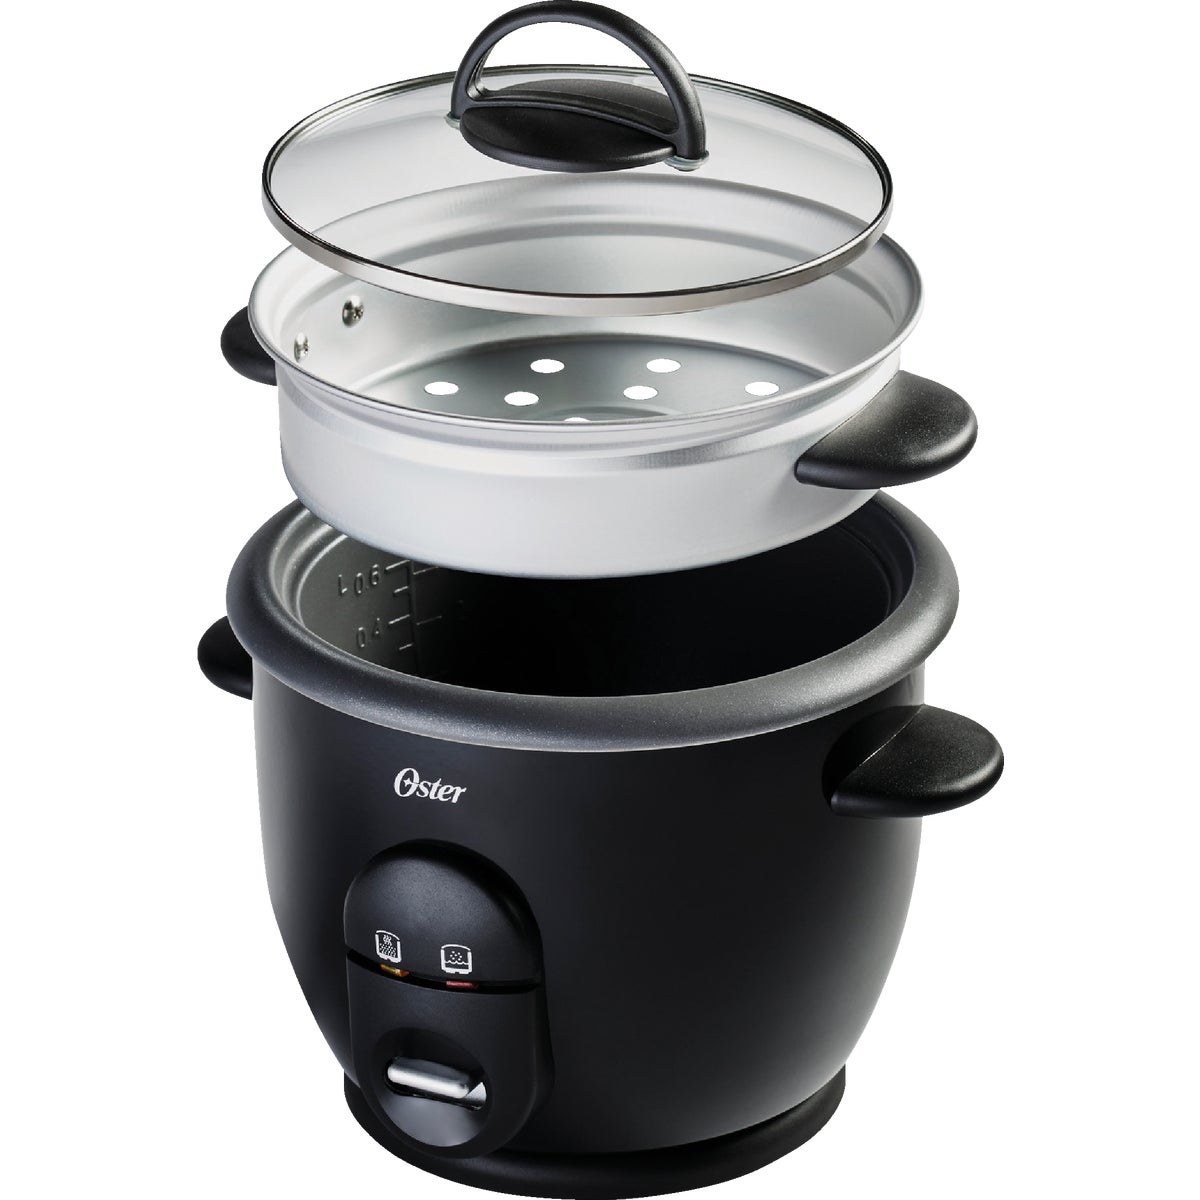 Oster DiamondForce 6-Cup Nonstick Electric Rice Cooker